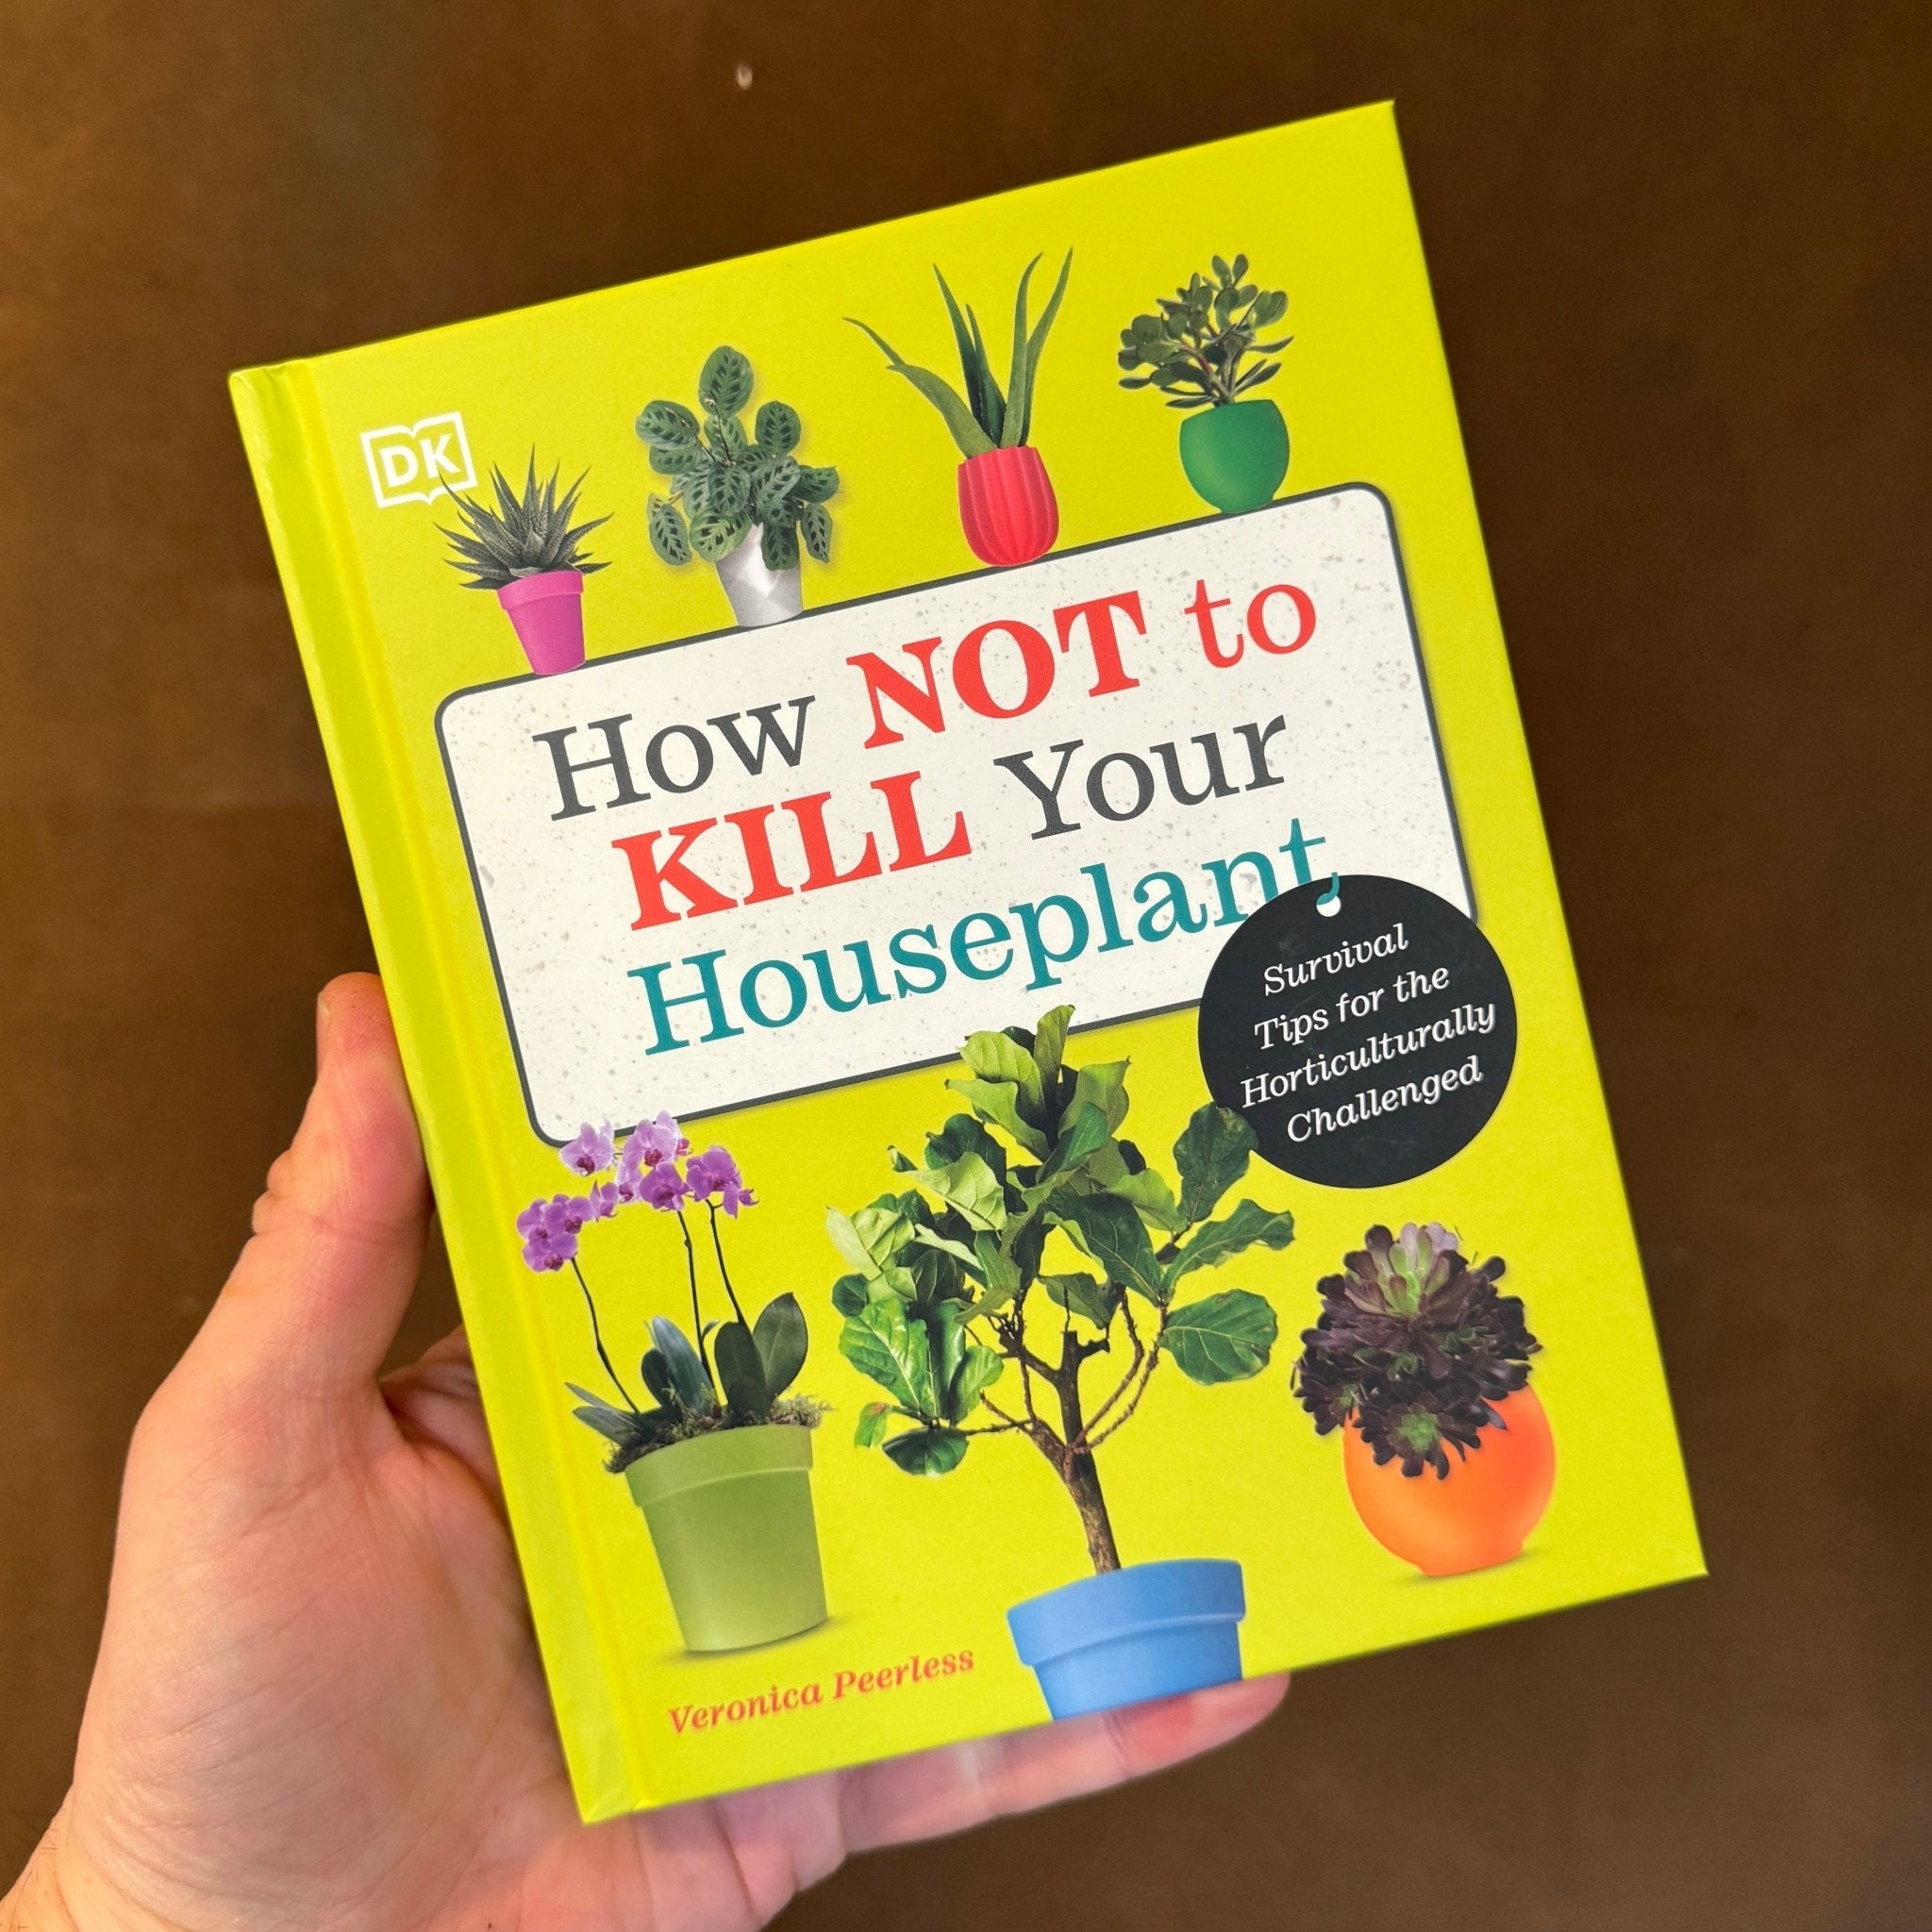 How Not to Kill Your Houseplant - grow urban. UK